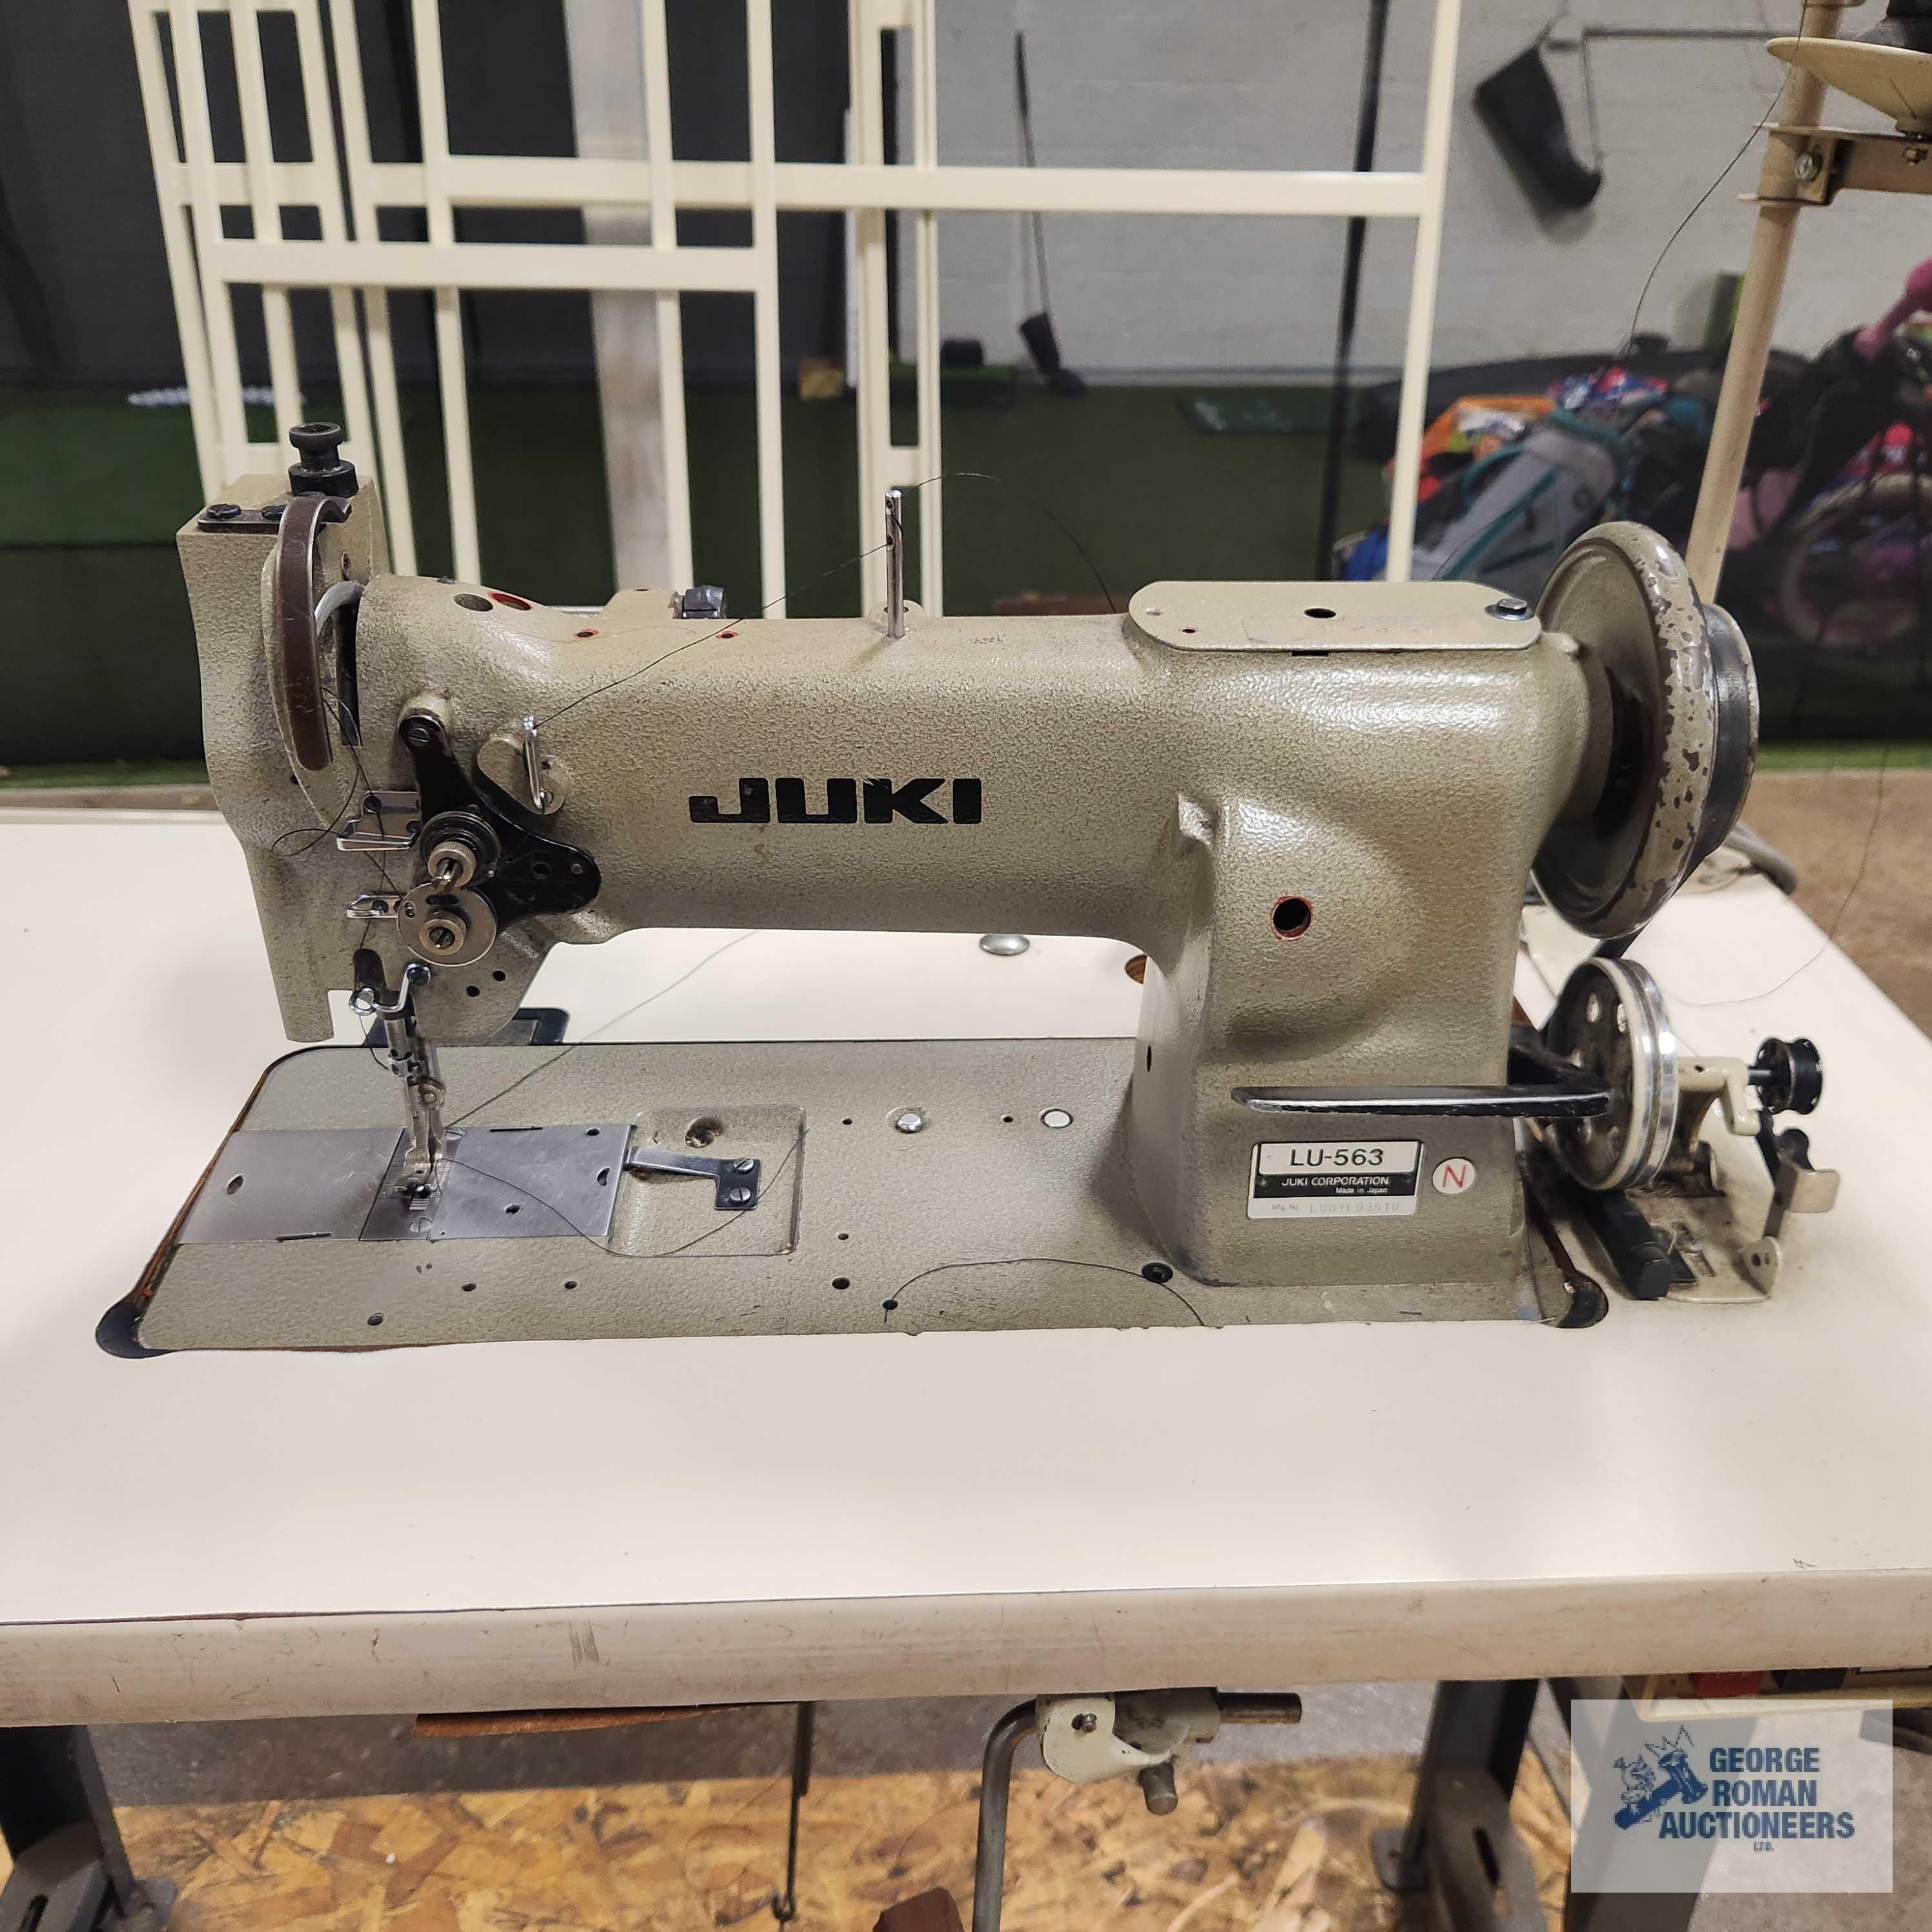 Juki model number LU-563 commercial sewing machine with fold-out platform